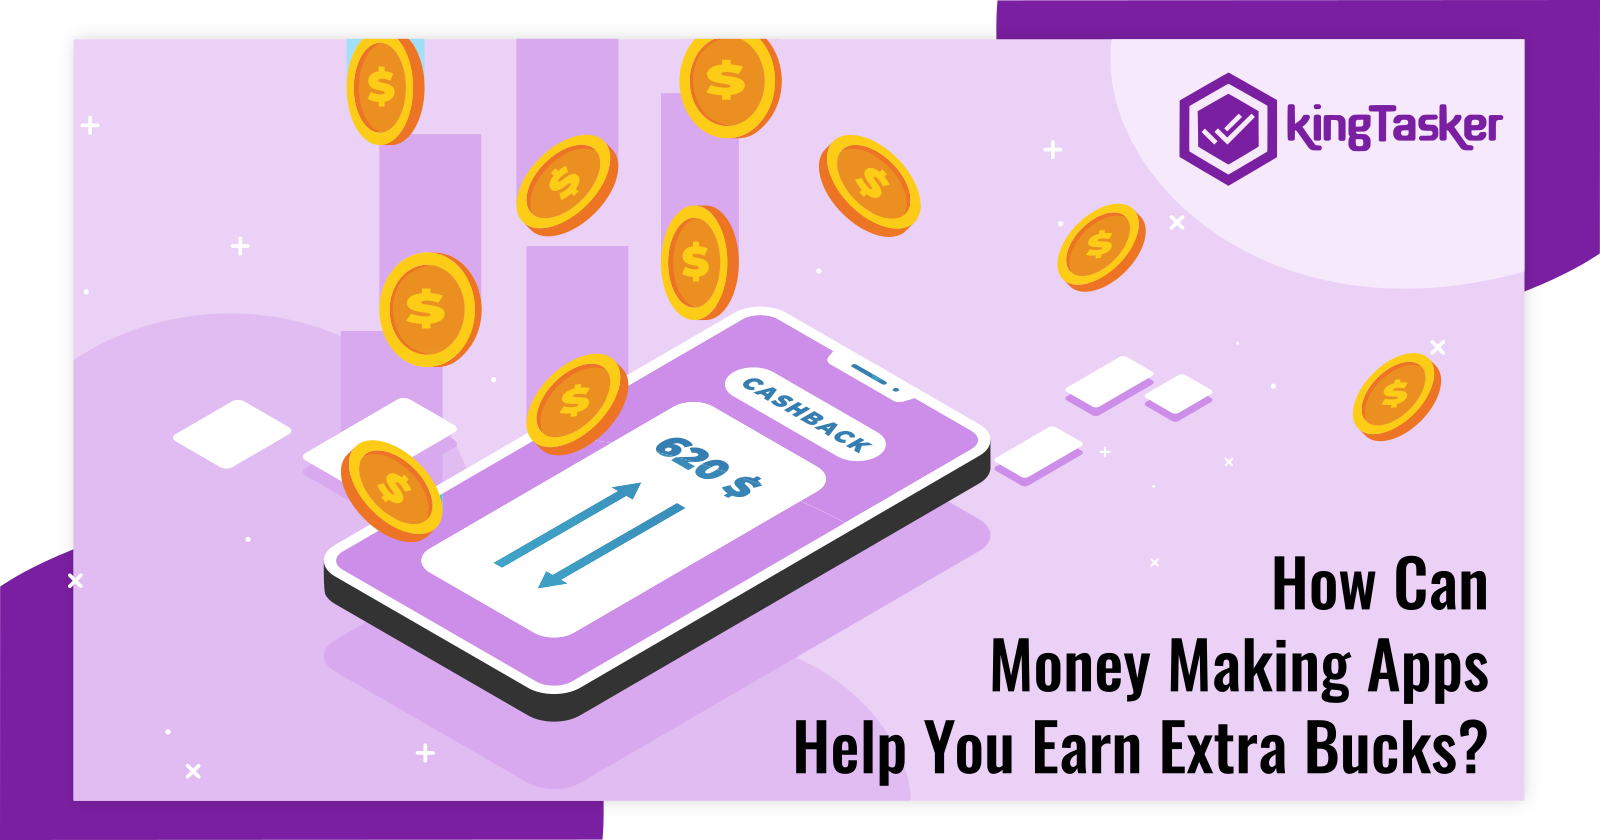 How Can Money Making Apps Help You Earn Extra Bucks?